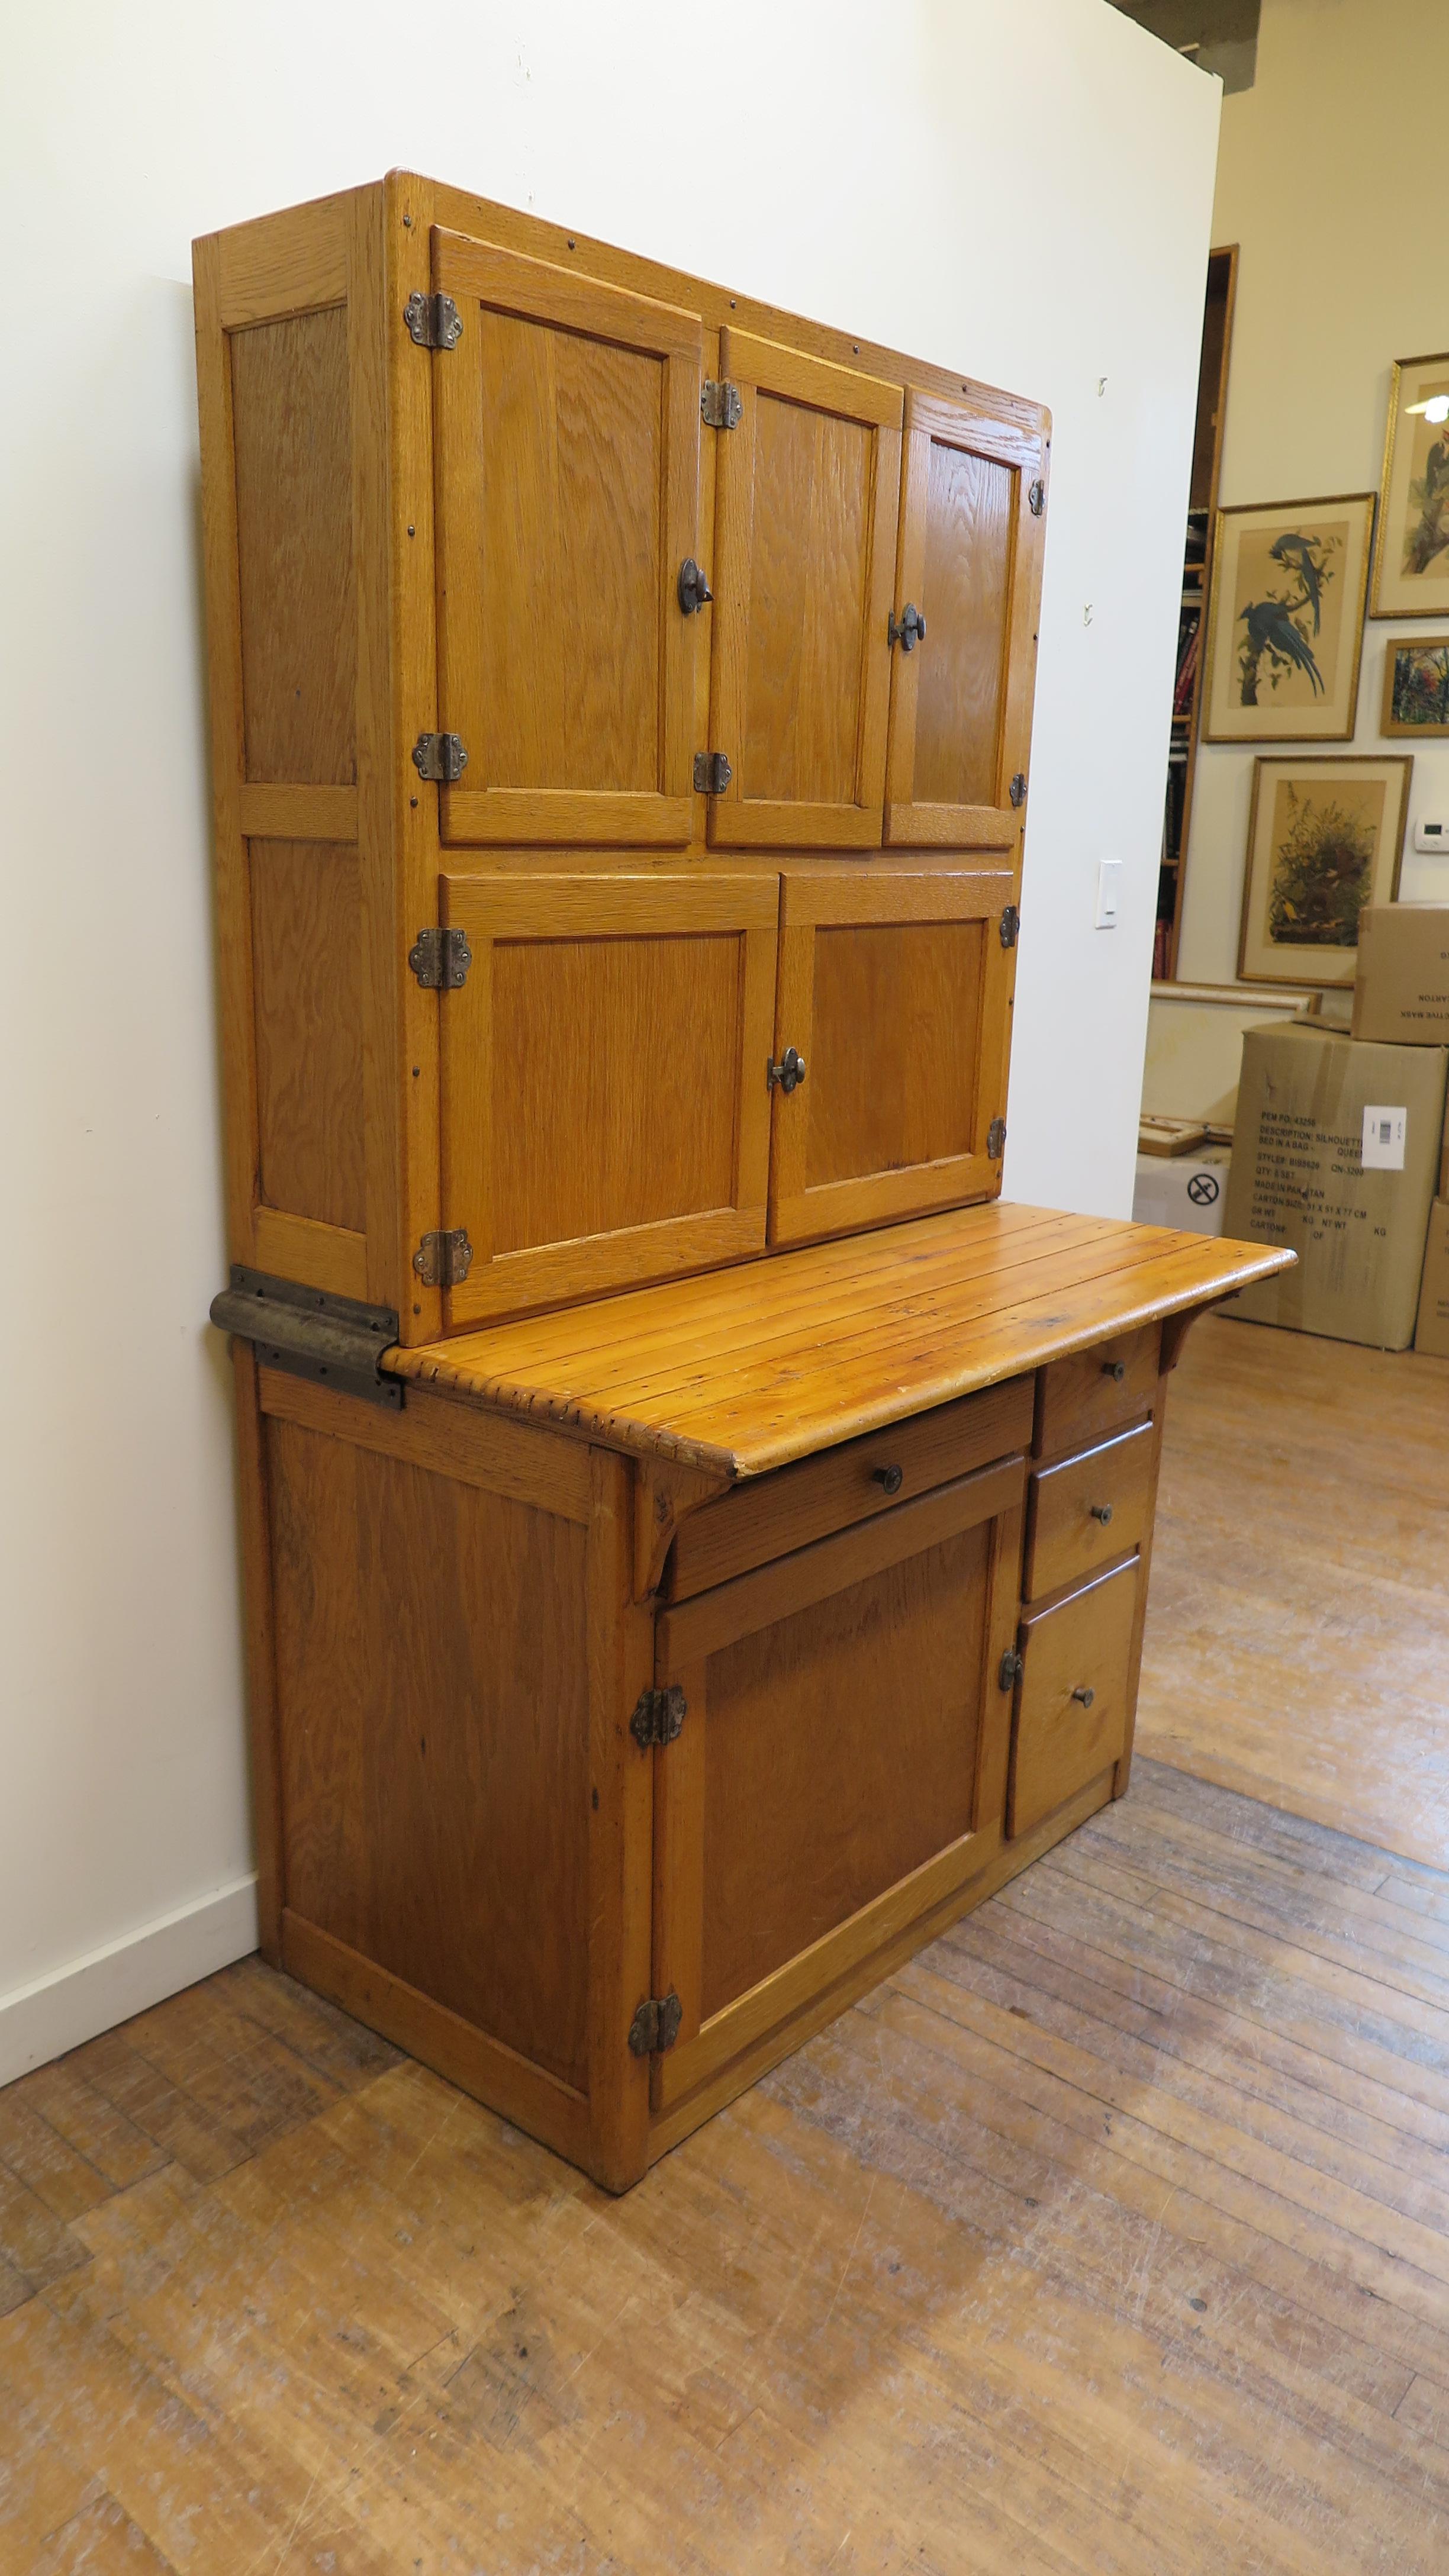 Early 20th century Hoosier cabinet. American Oak Hoosier cabinet from 1910-20. Hoosier Cabinets originated in Indiana as a type of cupboard or free-standing kitchen cabinet that also serves as a workstation. Having a pull out cutting board,